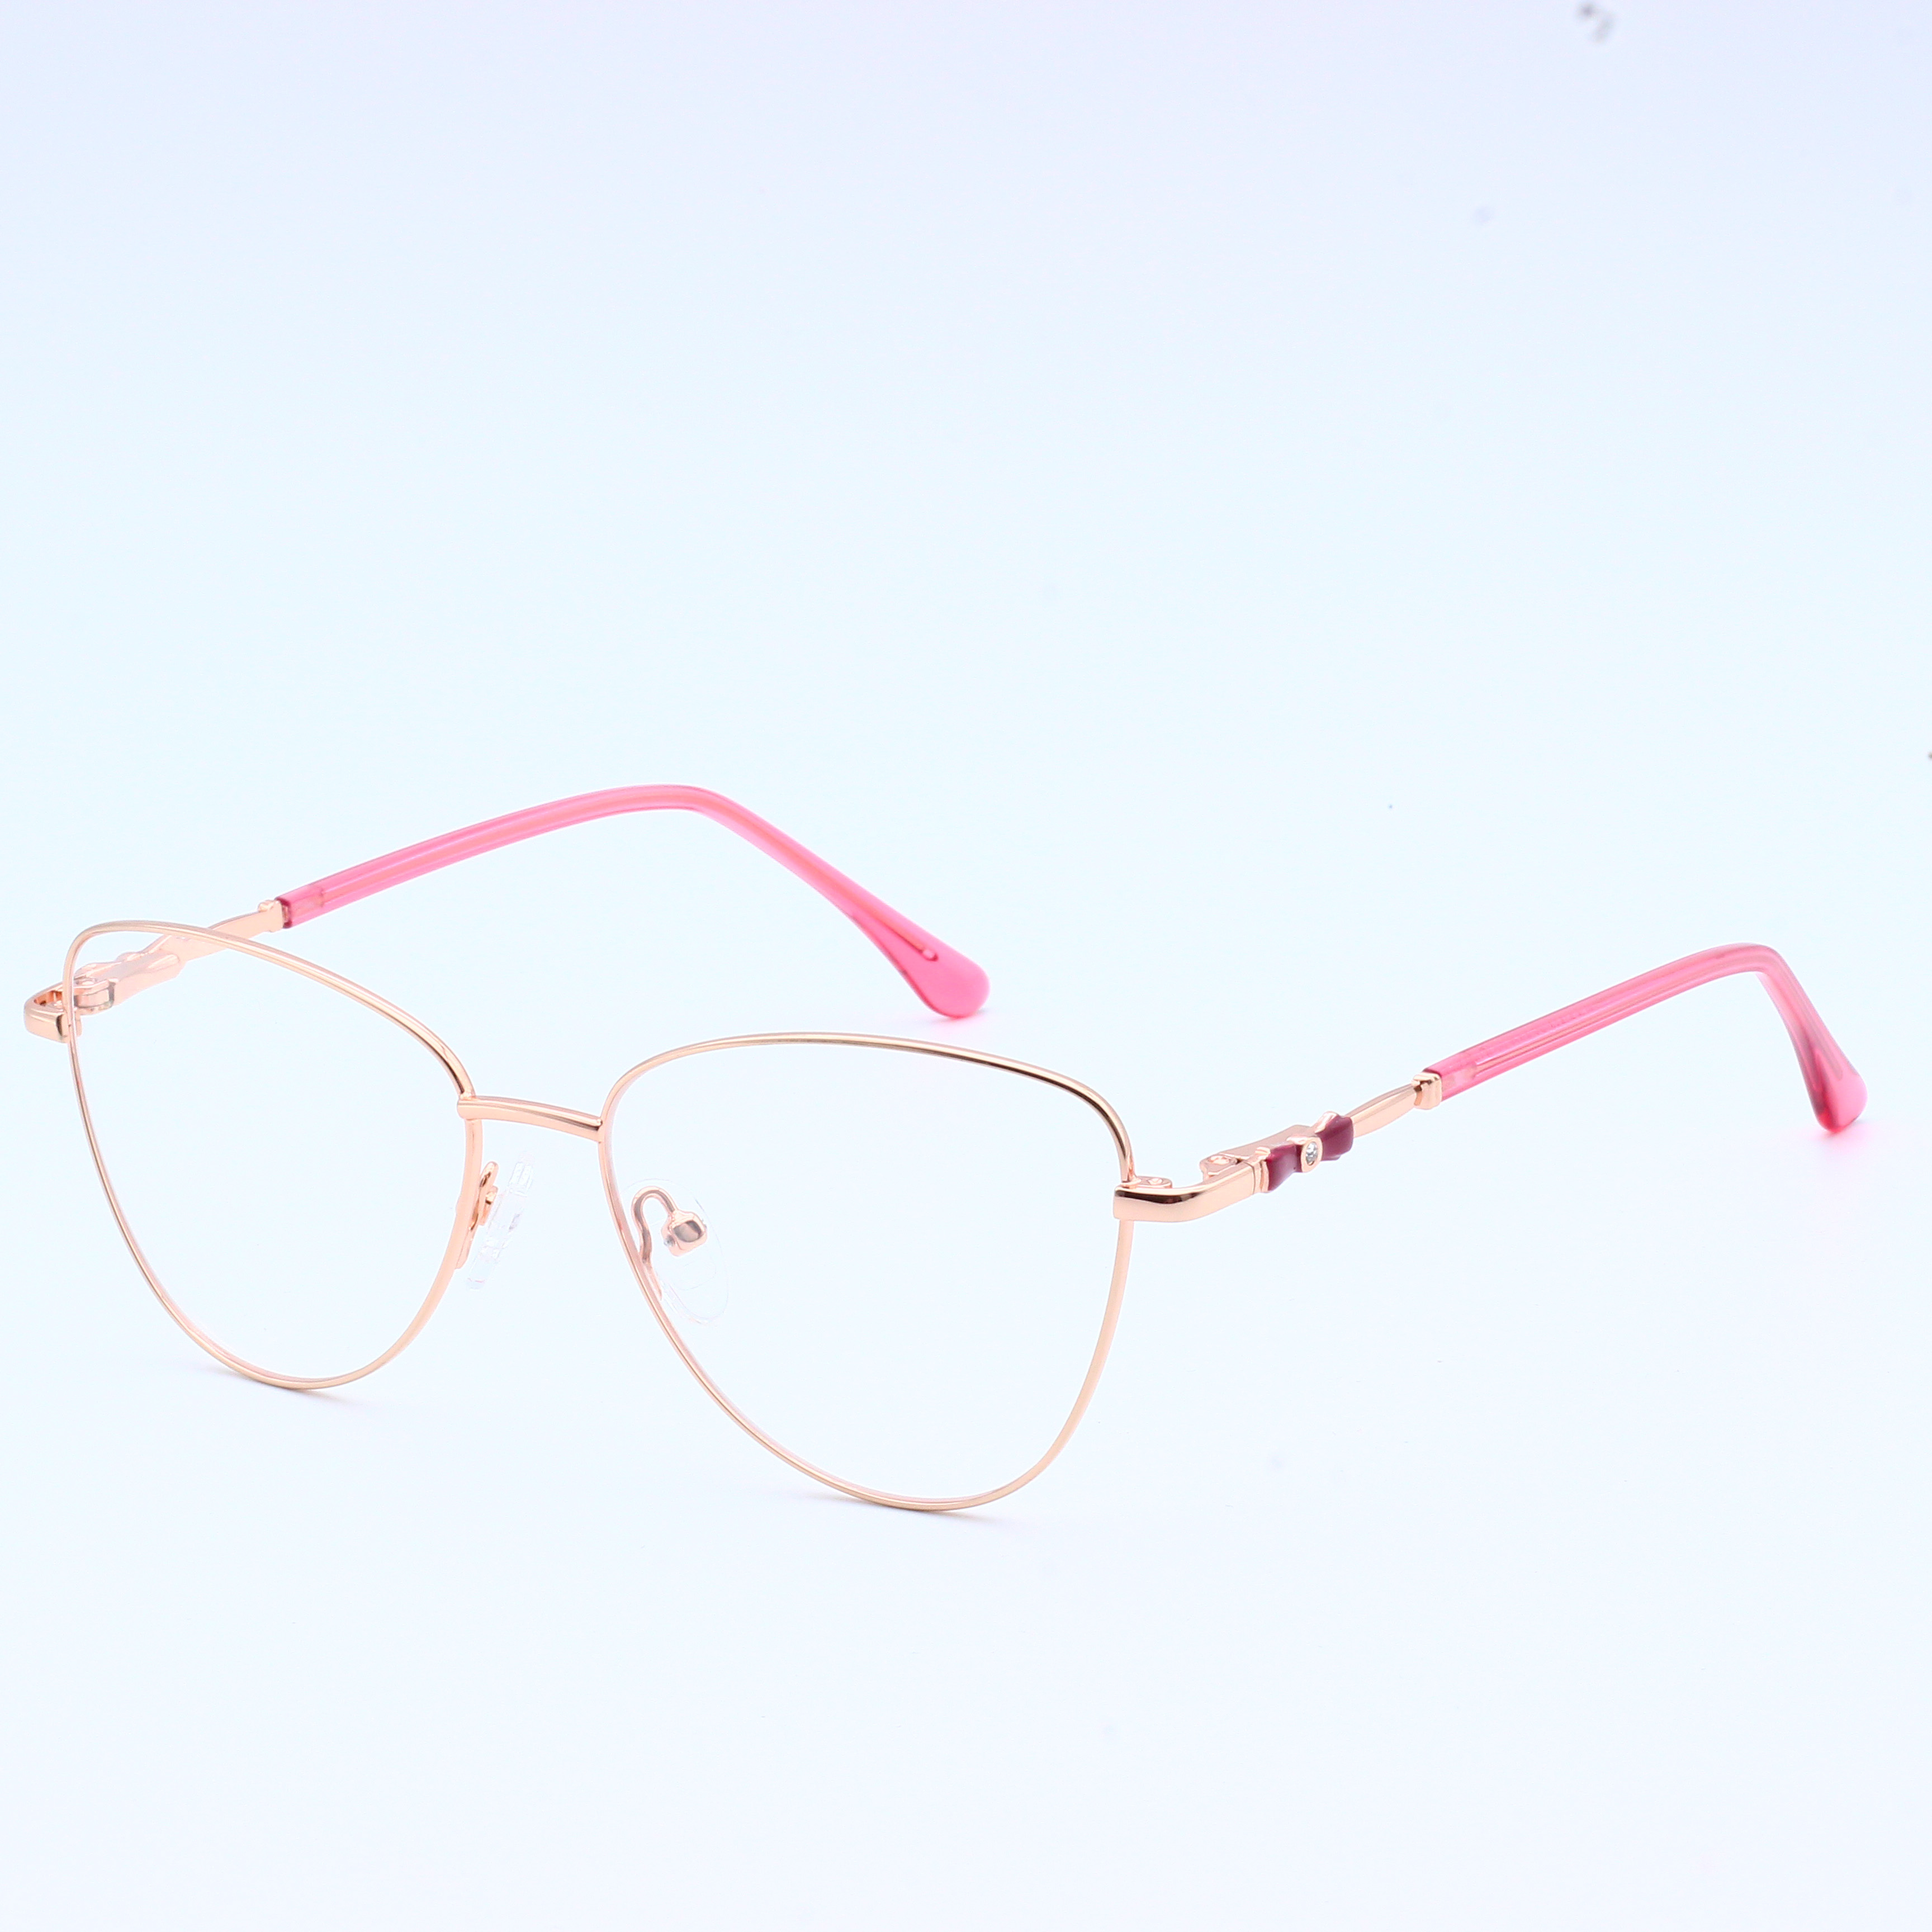 Eyeglasses Business Optical spectacle Frames In Stock (8)